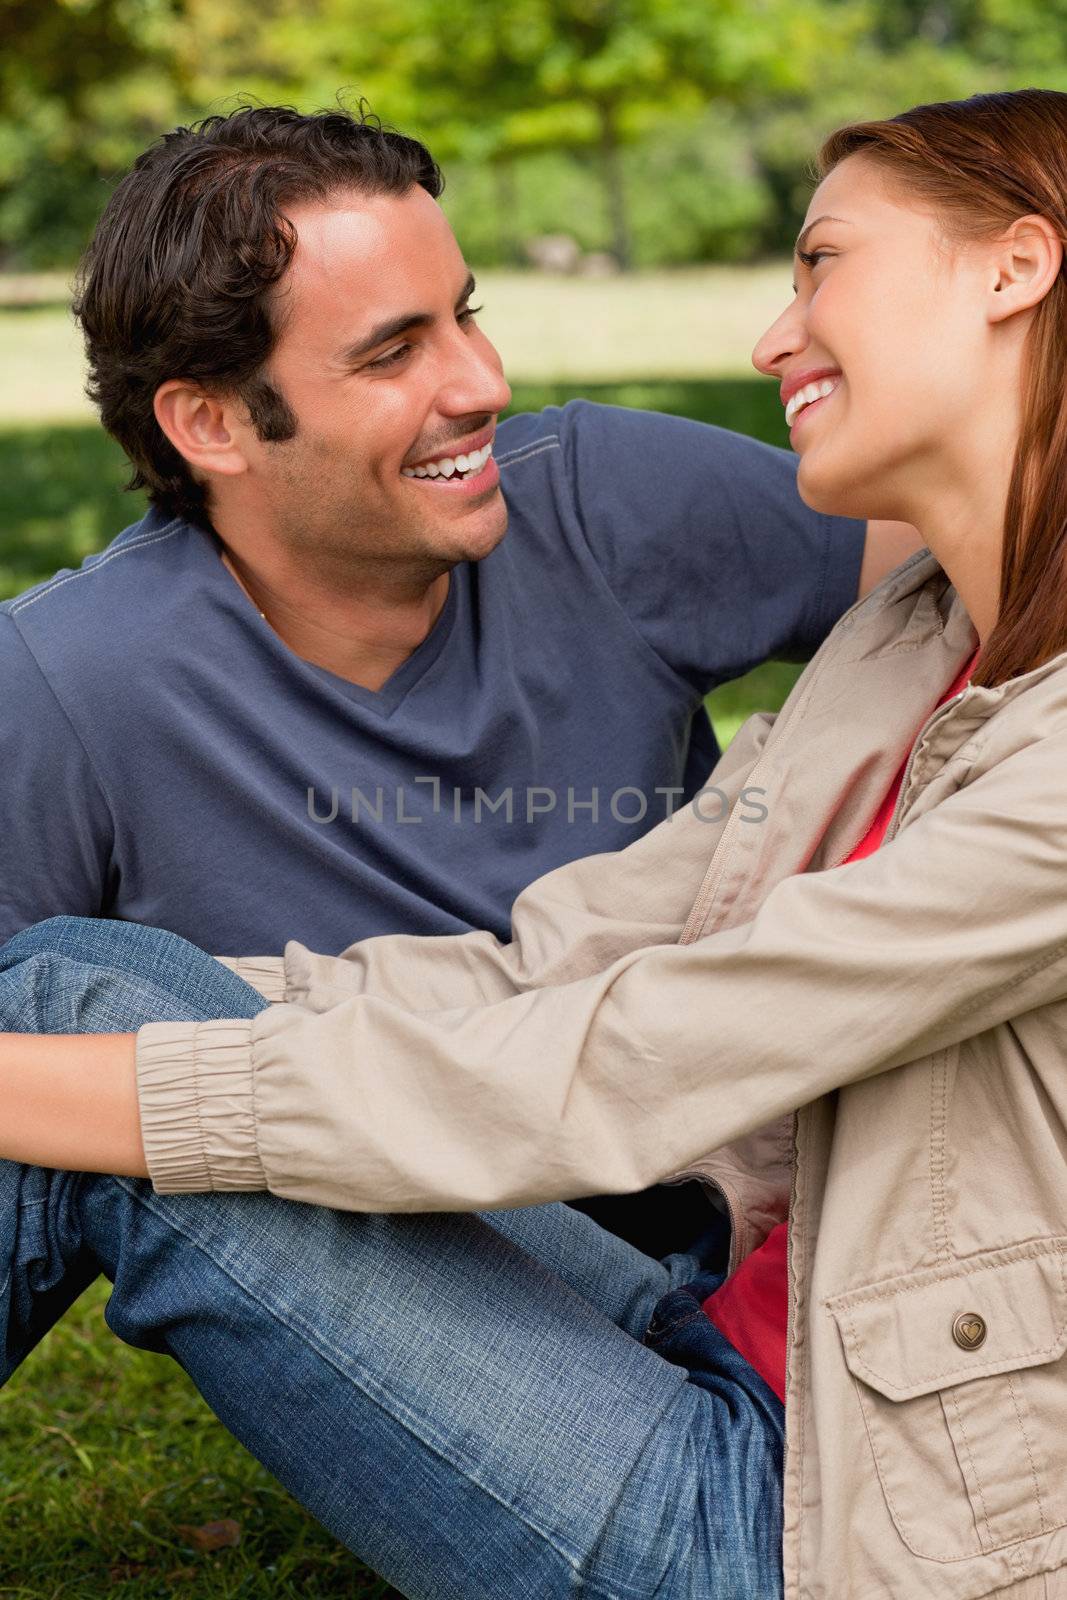 Two friends with delighted expressions look into each others eyes while they are both sitting on the grass